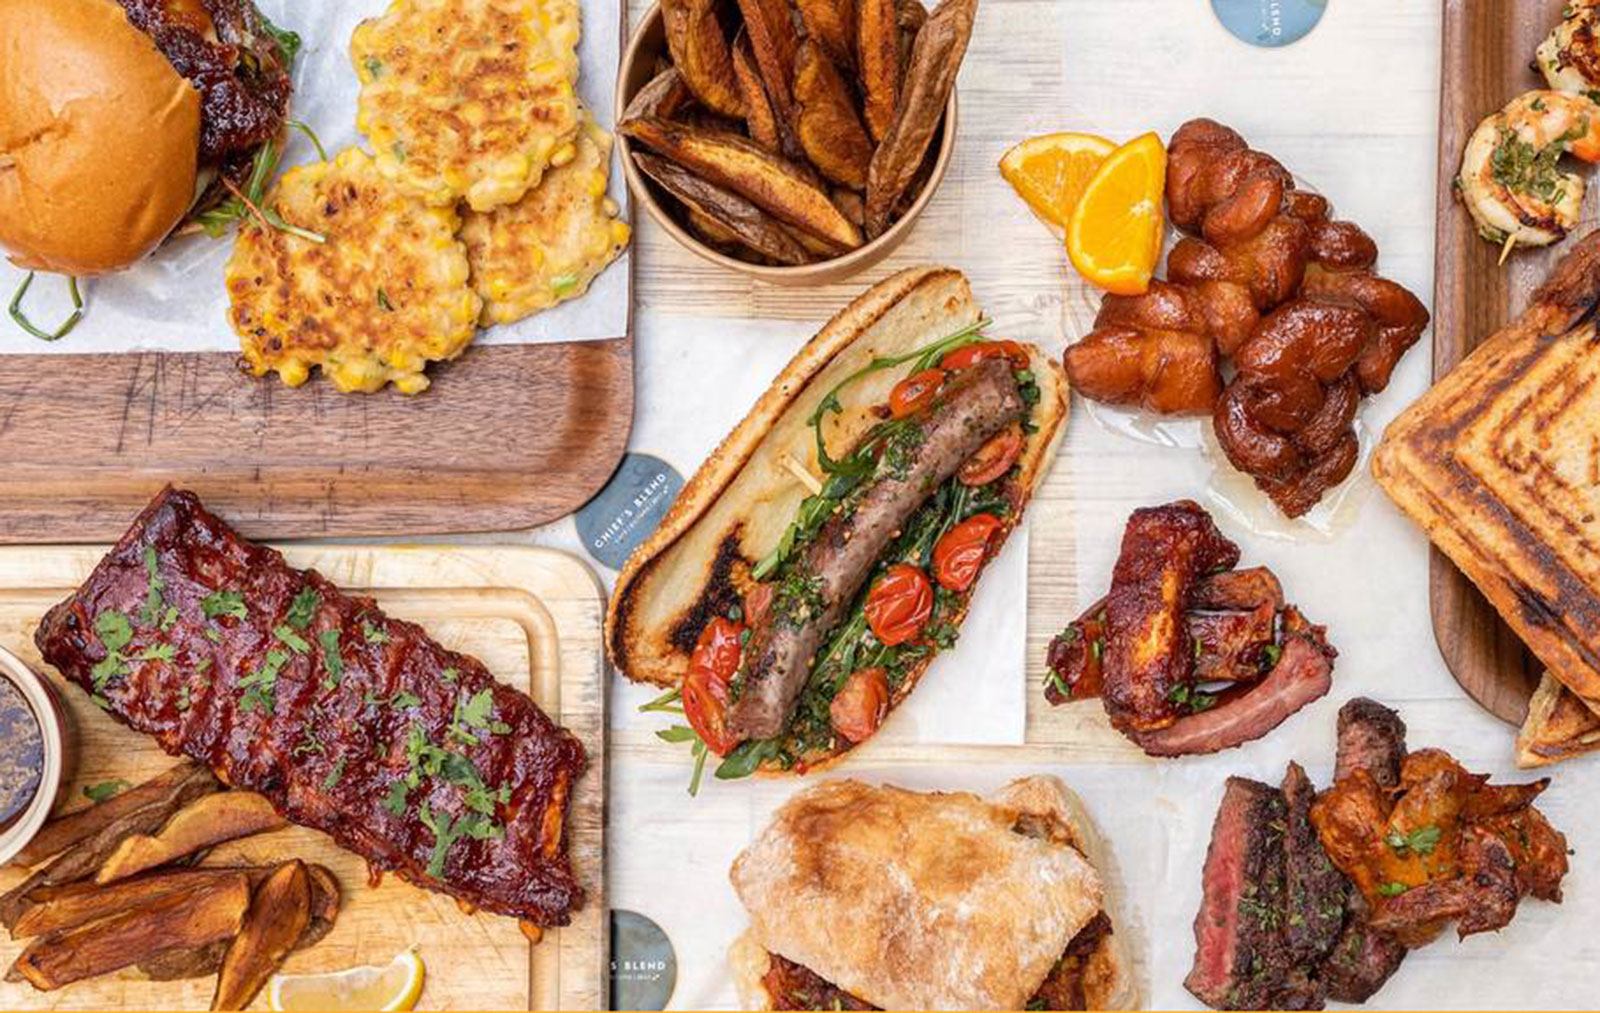 Get your fix of South African meats and snacks at Chief's Blend, one of Hong Kong's best restaurants